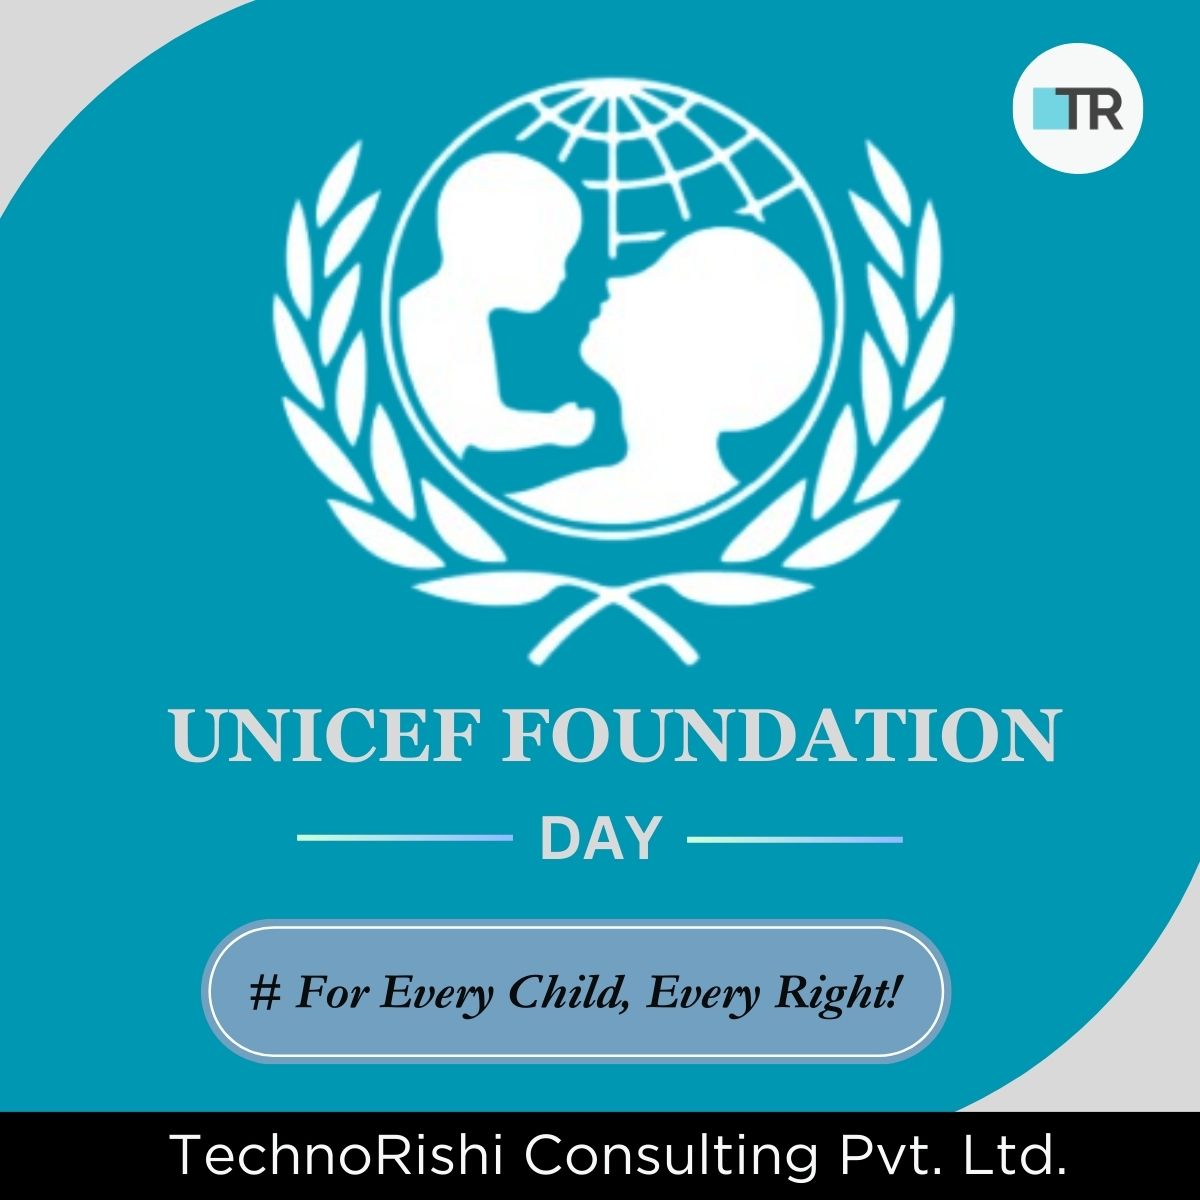 💯Supporting children worldwide. 🧒

💫On UNICEF Foundation Day, let’s contribute to a brighter future for every child.

#unicef #unicefindia #everychildmatters #literacymatters #hungerfornone #technorishiconsulting #technorishi